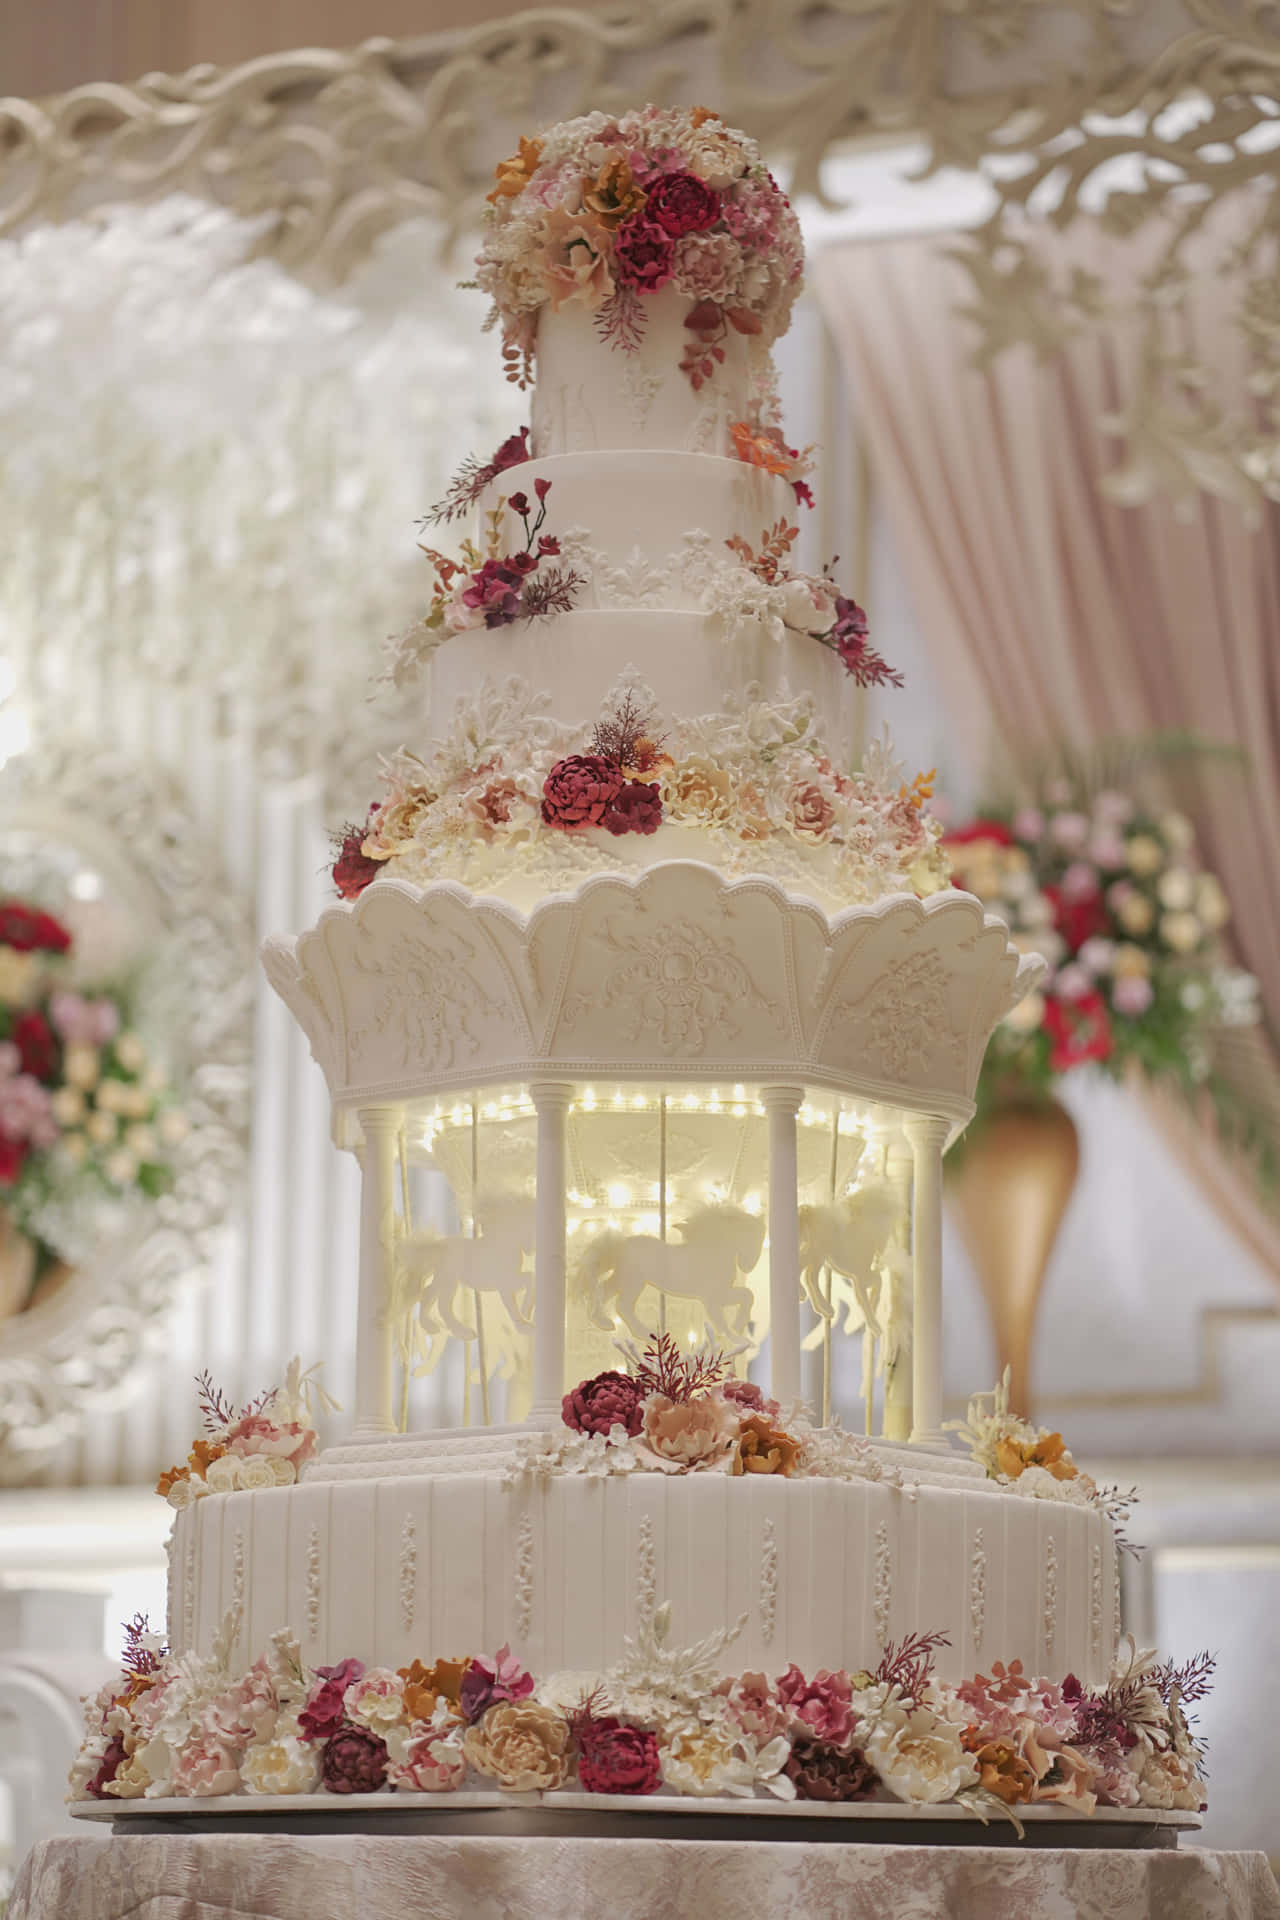 "A deliciously tiered and decorated wedding cake, perfect for any celebration"